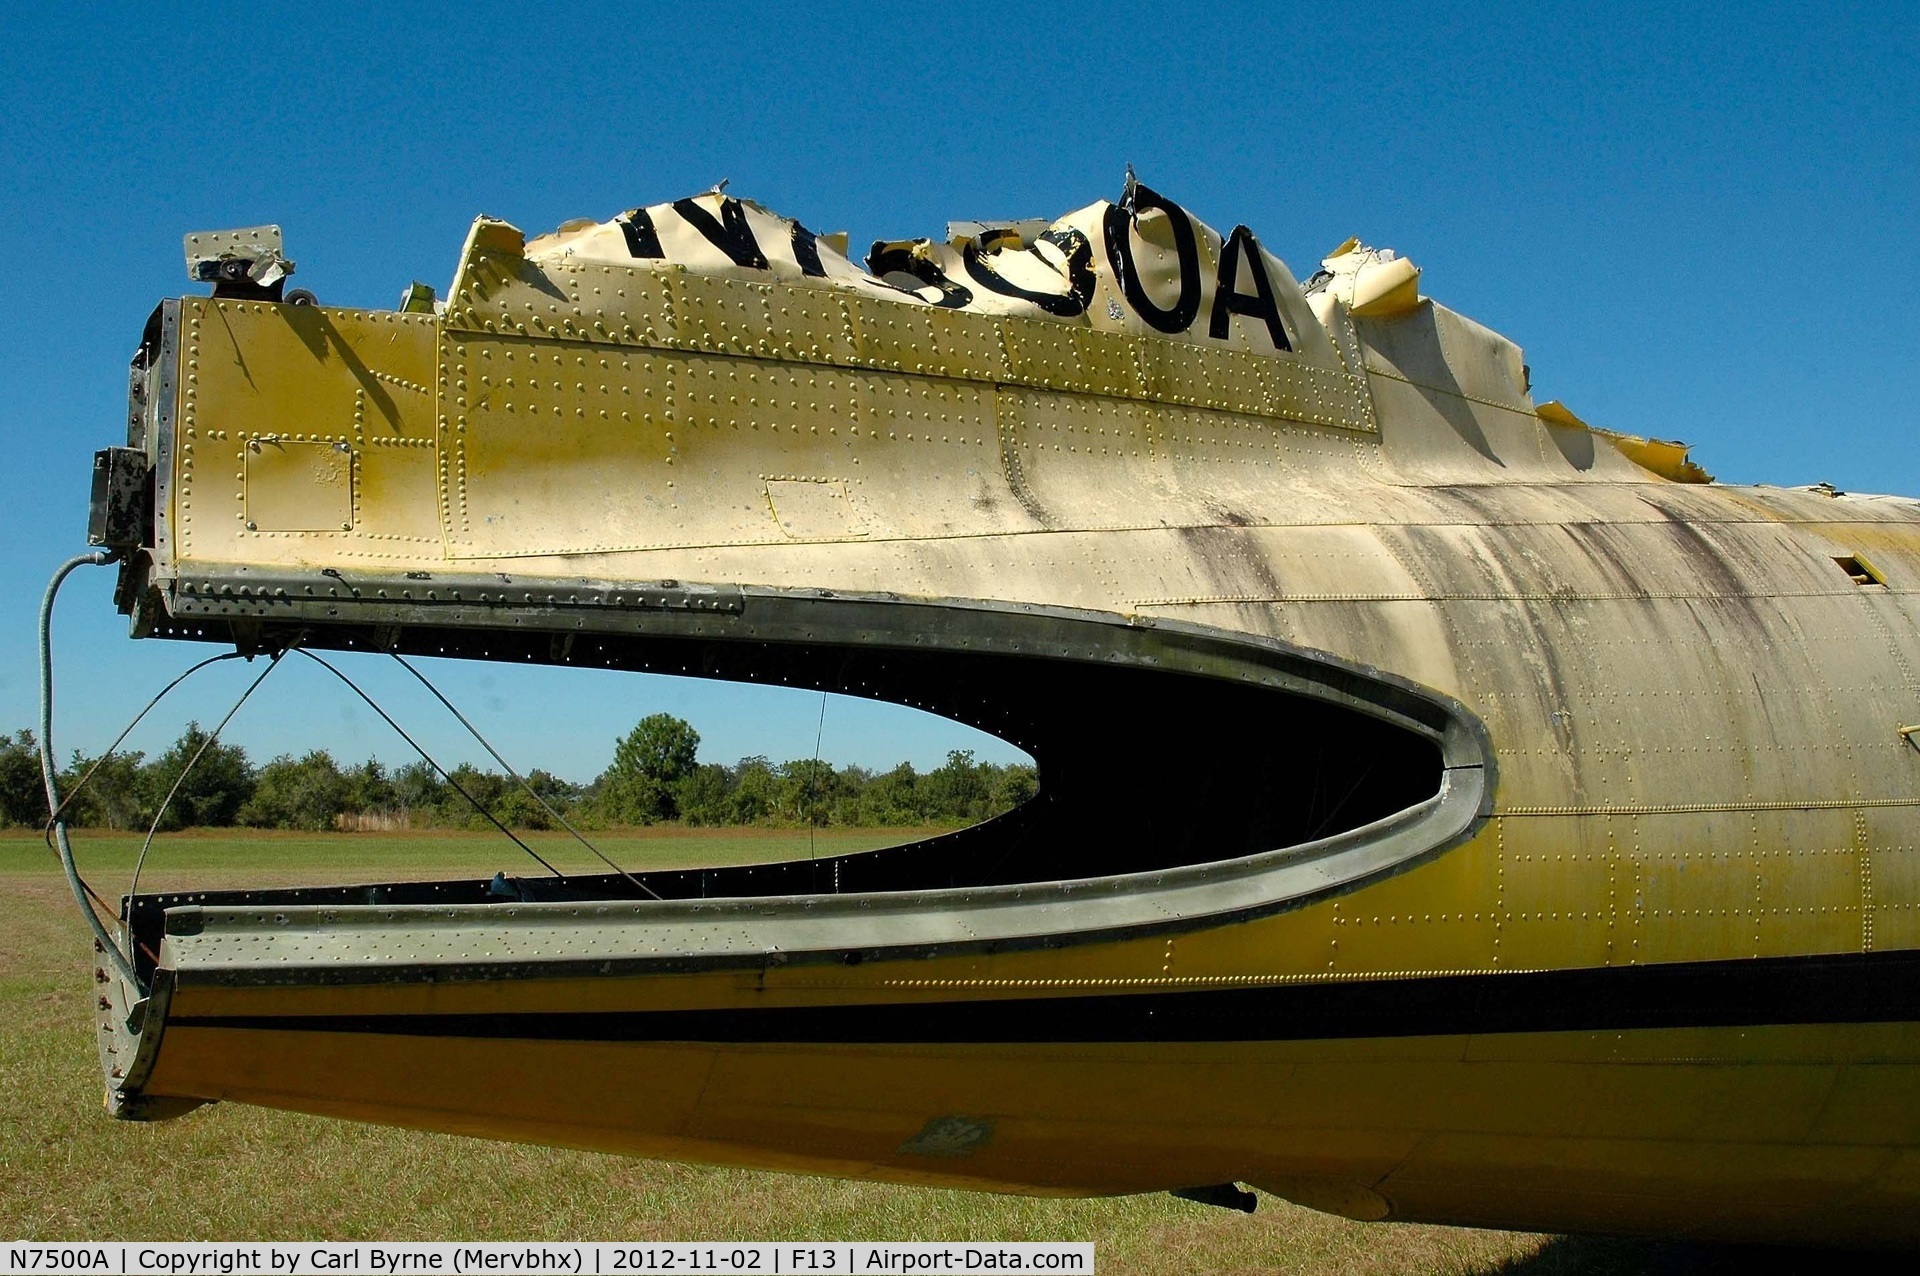 N7500A, 1956 Douglas DC-3 C/N 11693, The remains of this aircraft at Shell Creek Airpark.